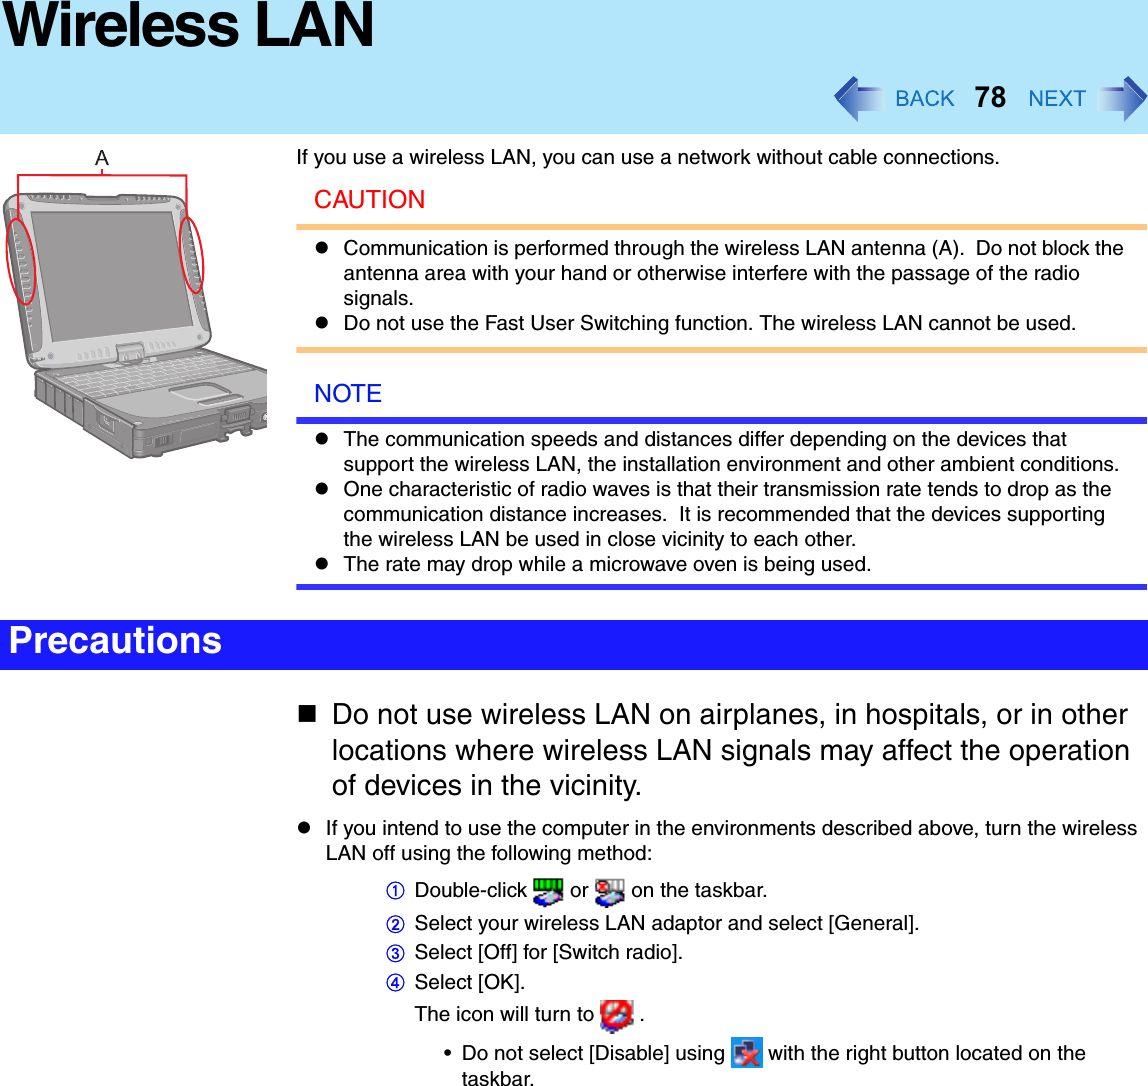 78Wireless LANIf you use a wireless LAN, you can use a network without cable connections.CAUTIONCommunication is performed through the wireless LAN antenna (A).  Do not block the antenna area with your hand or otherwise interfere with the passage of the radio signals.Do not use the Fast User Switching function. The wireless LAN cannot be used.NOTEThe communication speeds and distances differ depending on the devices that support the wireless LAN, the installation environment and other ambient conditions.One characteristic of radio waves is that their transmission rate tends to drop as the communication distance increases.  It is recommended that the devices supporting the wireless LAN be used in close vicinity to each other.The rate may drop while a microwave oven is being used.Do not use wireless LAN on airplanes, in hospitals, or in other locations where wireless LAN signals may affect the operation of devices in the vicinity.If you intend to use the computer in the environments described above, turn the wireless LAN off using the following method:ADouble-click   or   on the taskbar.BSelect your wireless LAN adaptor and select [General].CSelect [Off] for [Switch radio].DSelect [OK].The icon will turn to   .• Do not select [Disable] using   with the right button located on the taskbar.Precautions